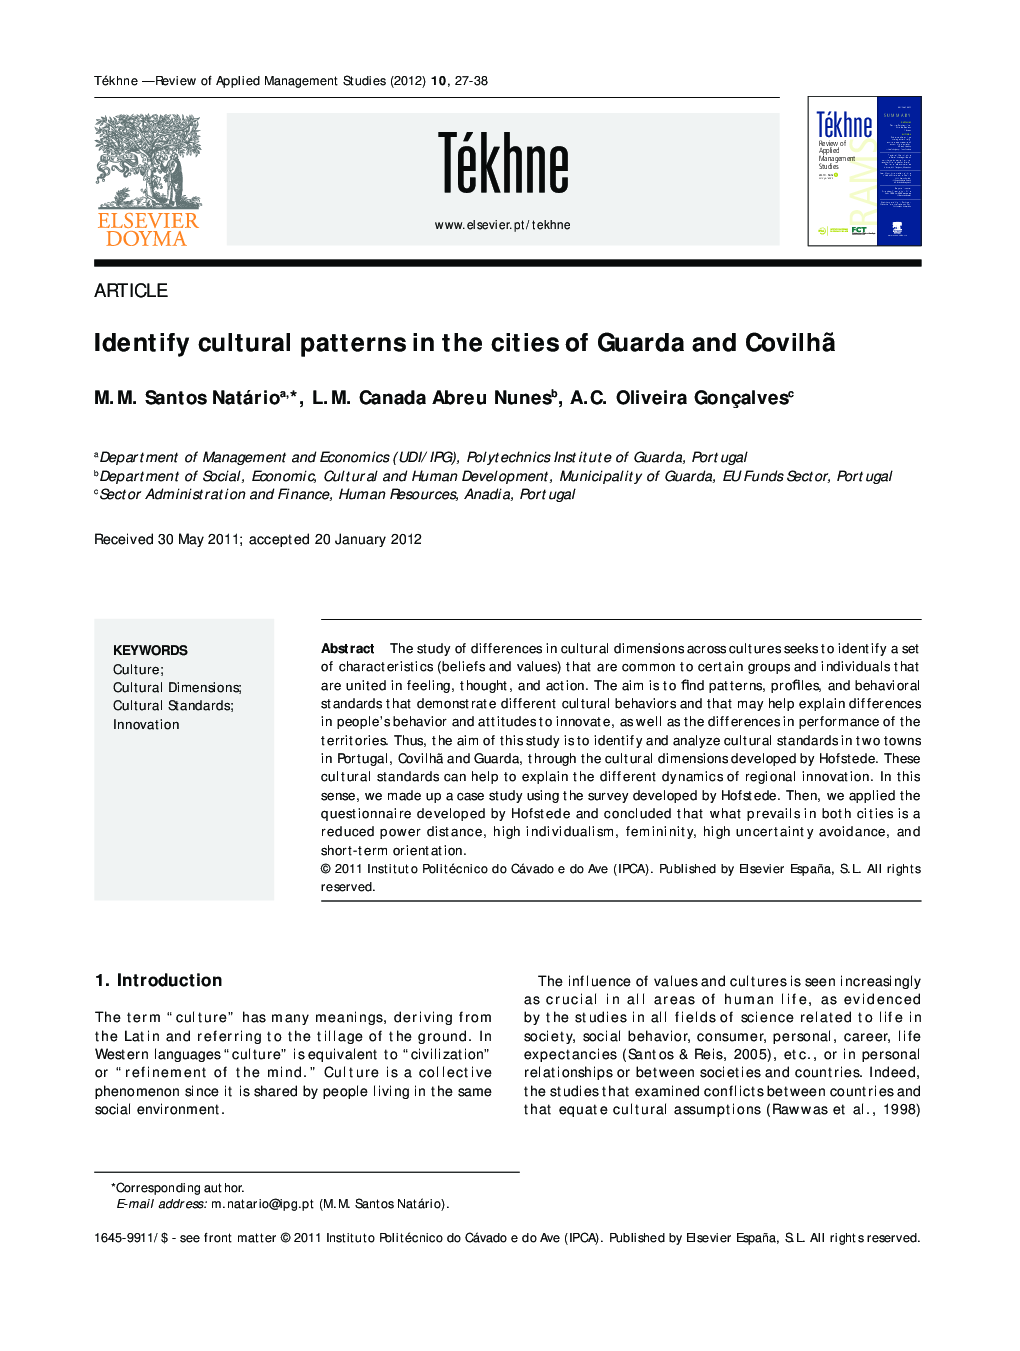 Identify cultural patterns in the cities of Guarda and CovilhÃ£